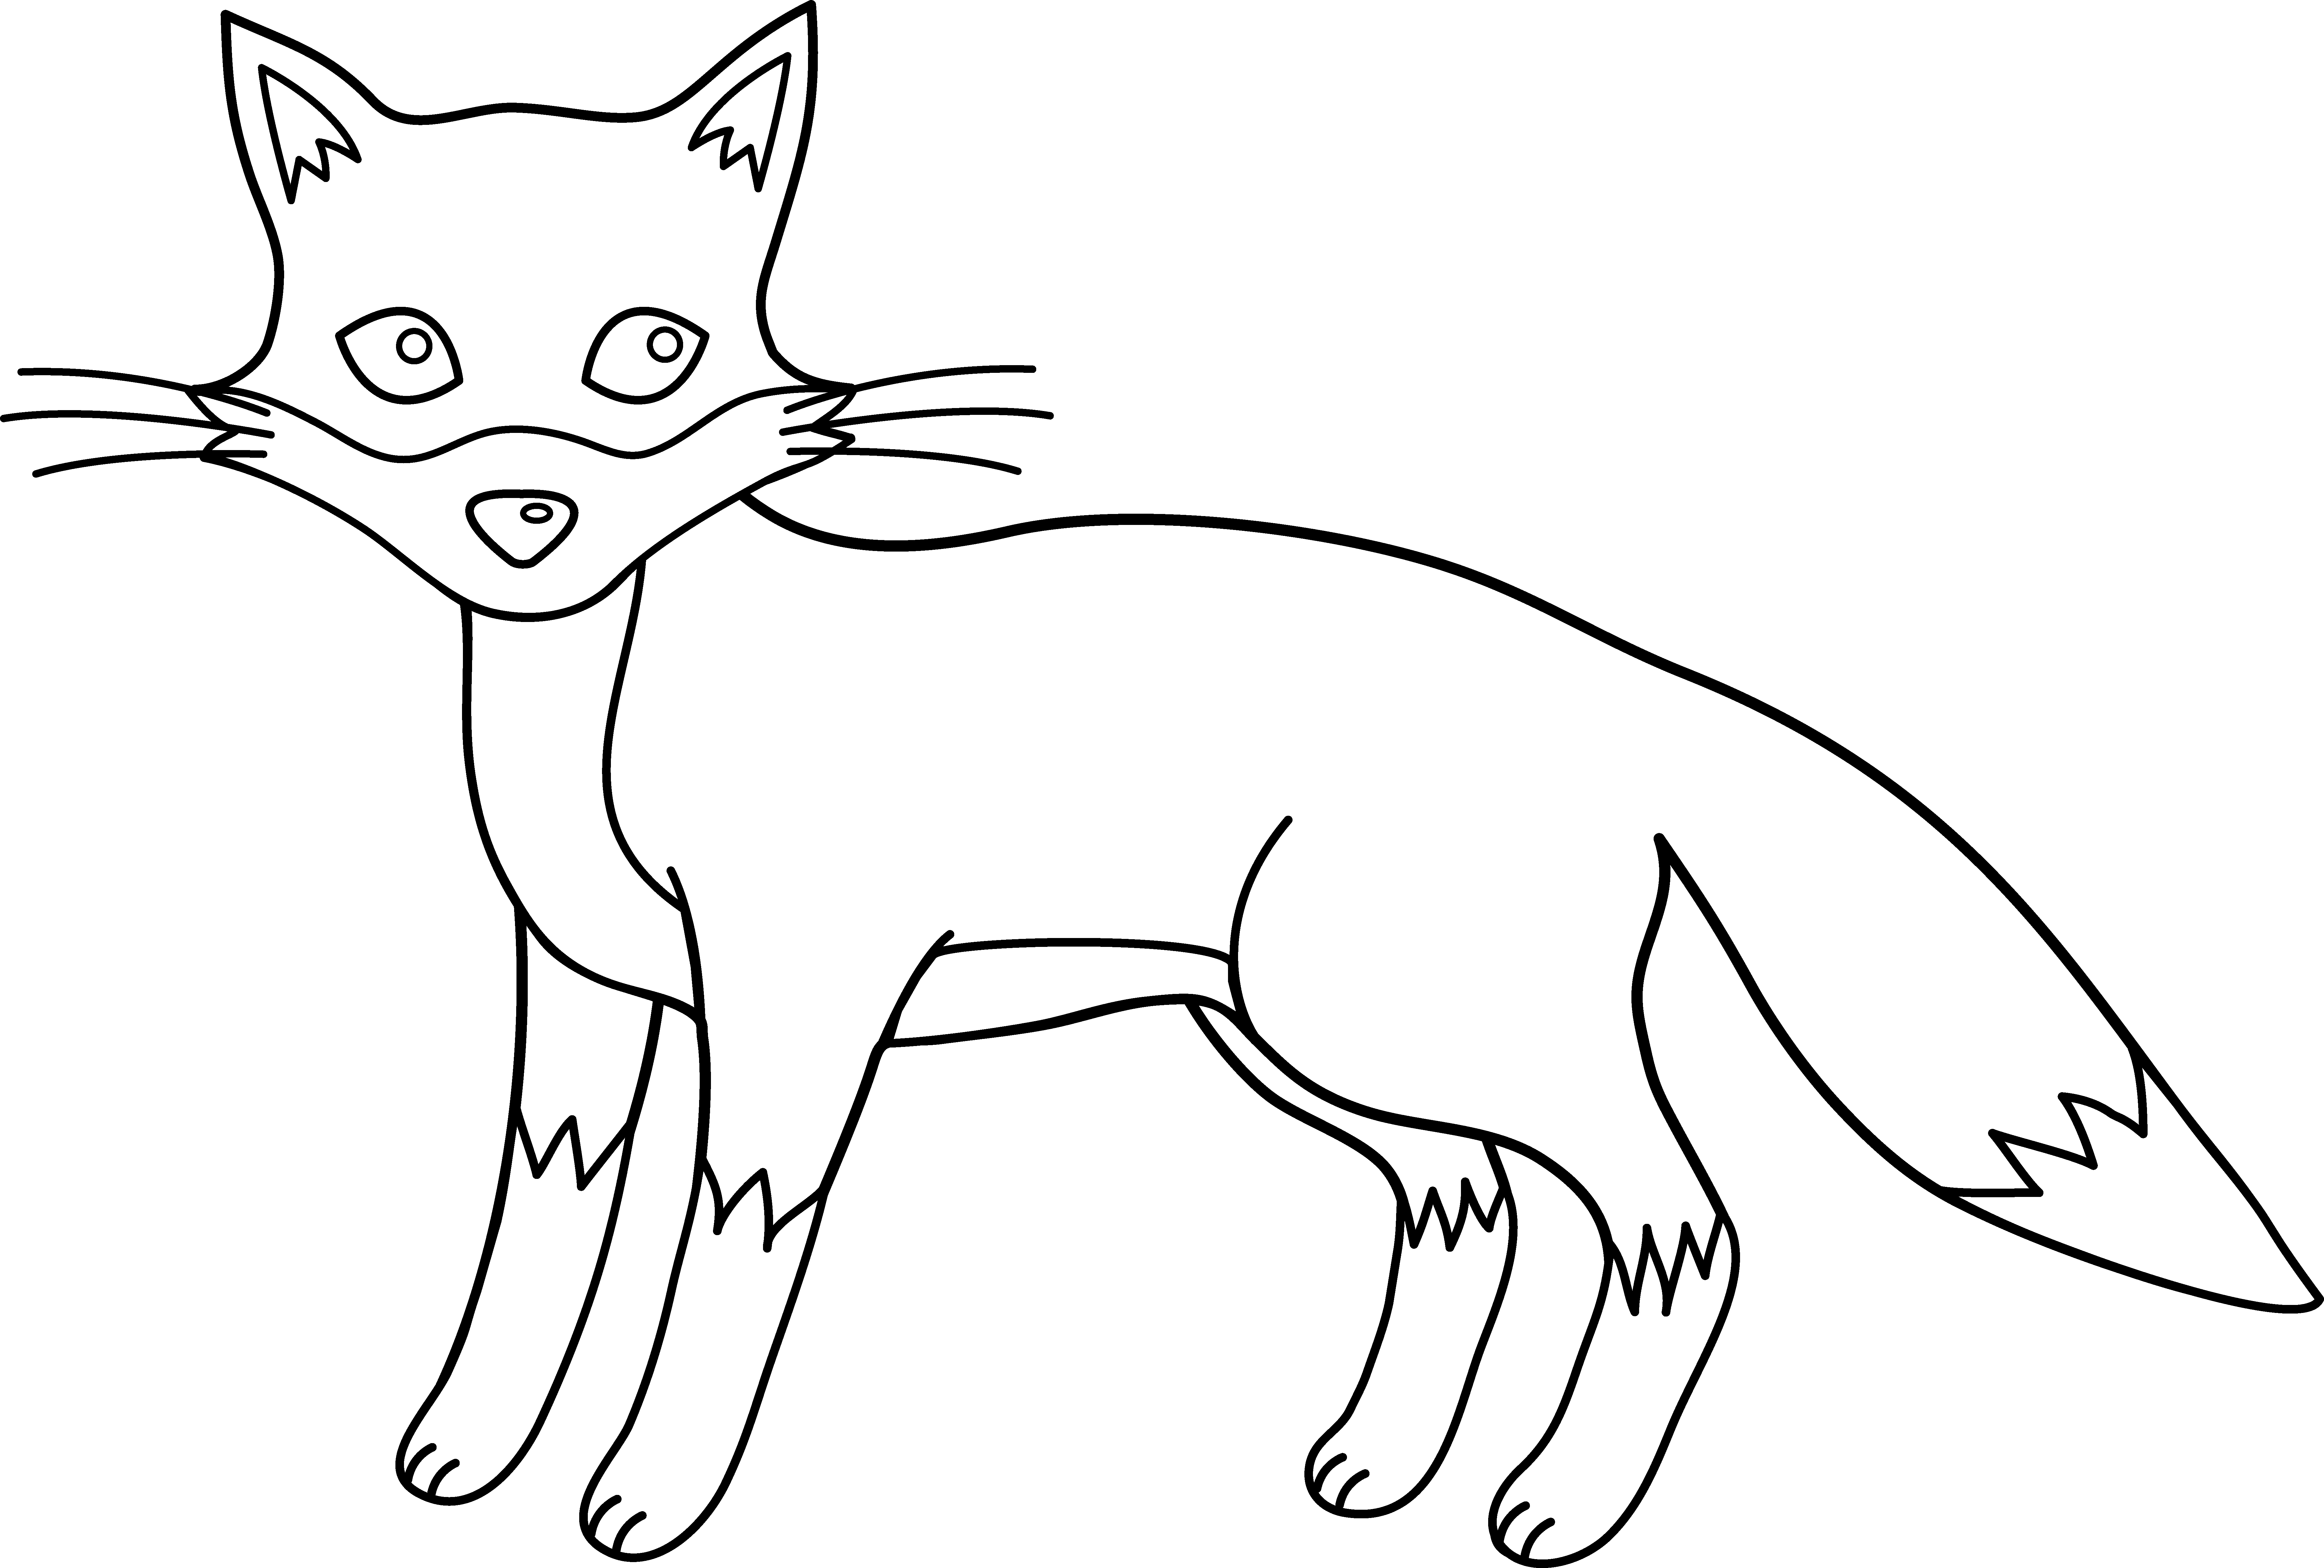 Outline clipart fox, Outline fox Transparent FREE for download on